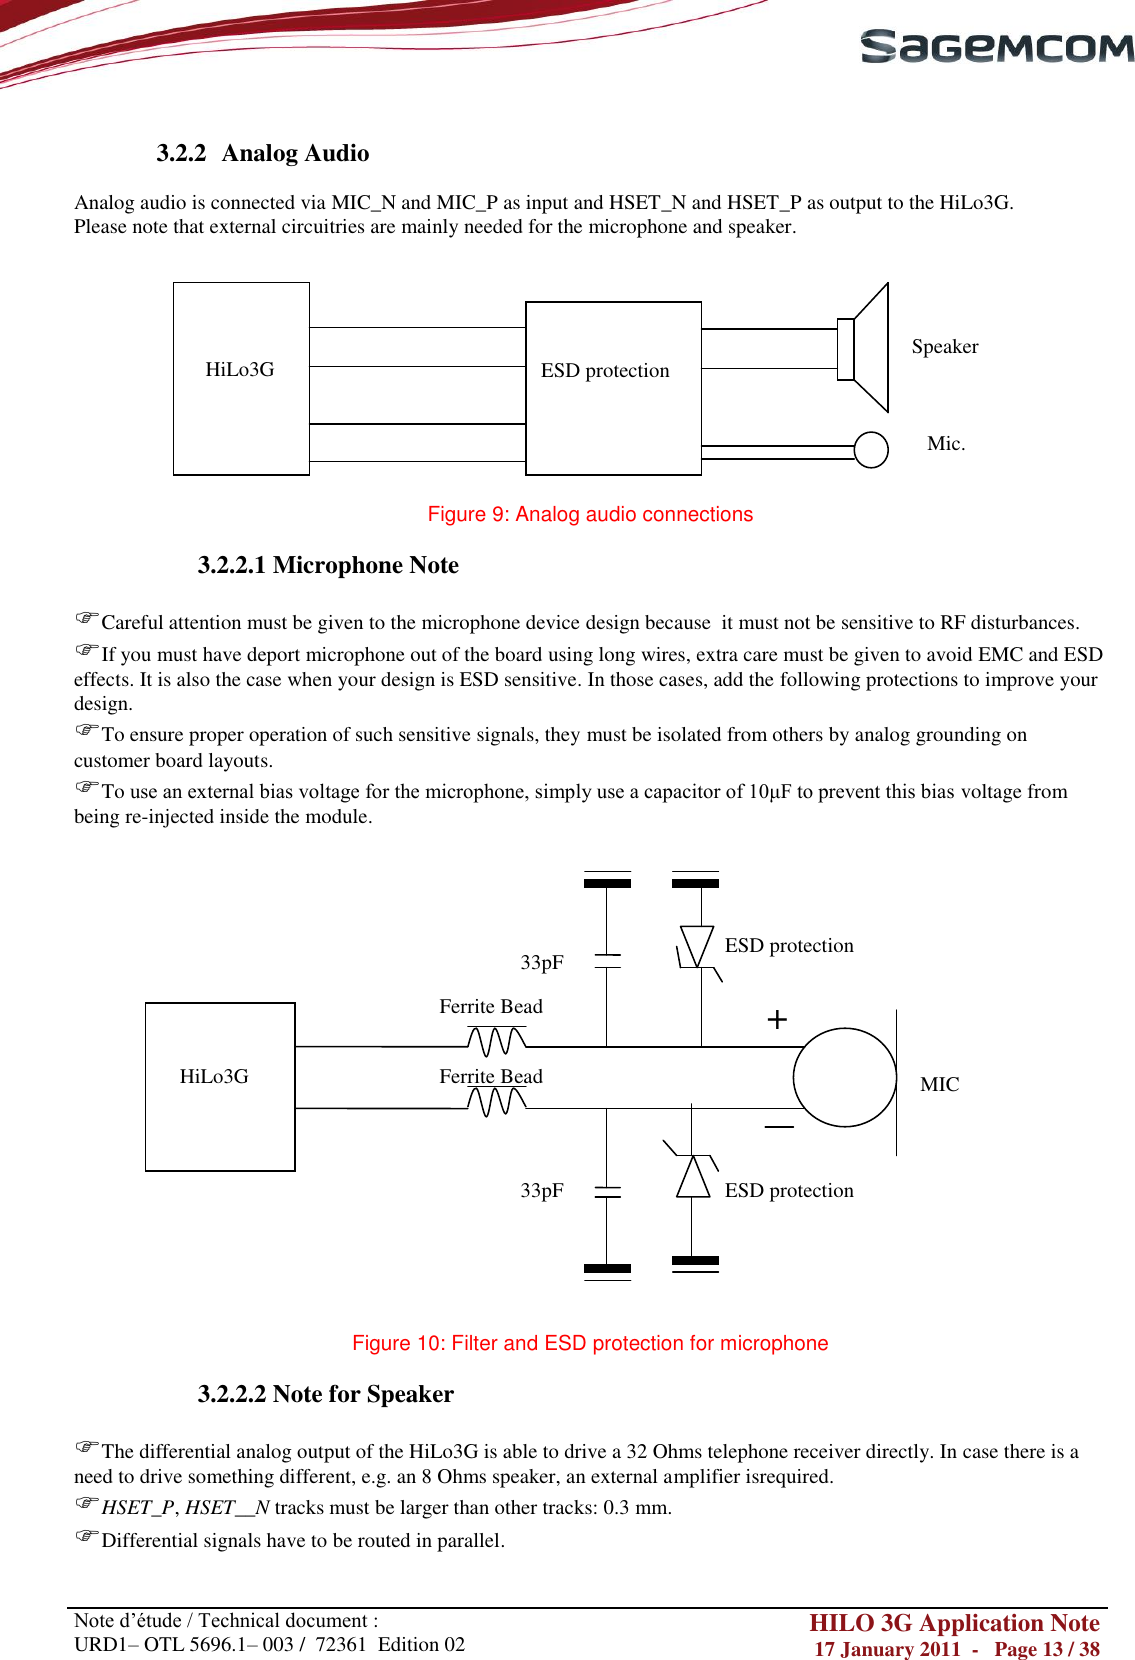       Note d‘étude / Technical document : URD1– OTL 5696.1– 003 /  72361  Edition 02 HILO 3G Application Note 17 January 2011  -   Page 13 / 38     3.2.2 Analog Audio  Analog audio is connected via MIC_N and MIC_P as input and HSET_N and HSET_P as output to the HiLo3G. Please note that external circuitries are mainly needed for the microphone and speaker.            Figure 9: Analog audio connections  3.2.2.1 Microphone Note  Careful attention must be given to the microphone device design because  it must not be sensitive to RF disturbances. If you must have deport microphone out of the board using long wires, extra care must be given to avoid EMC and ESD effects. It is also the case when your design is ESD sensitive. In those cases, add the following protections to improve your design. To ensure proper operation of such sensitive signals, they must be isolated from others by analog grounding on customer board layouts. To use an external bias voltage for the microphone, simply use a capacitor of 10μF to prevent this bias voltage from being re-injected inside the module.                      Figure 10: Filter and ESD protection for microphone  3.2.2.2 Note for Speaker  The differential analog output of the HiLo3G is able to drive a 32 Ohms telephone receiver directly. In case there is a need to drive something different, e.g. an 8 Ohms speaker, an external amplifier isrequired. HSET_P, HSET__N tracks must be larger than other tracks: 0.3 mm. Differential signals have to be routed in parallel.     HiLo3G  ESD protection Mic. Speaker MIC 33pF 33pF Ferrite Bead Ferrite Bead + ESD protection ESD protection HiLo3G 